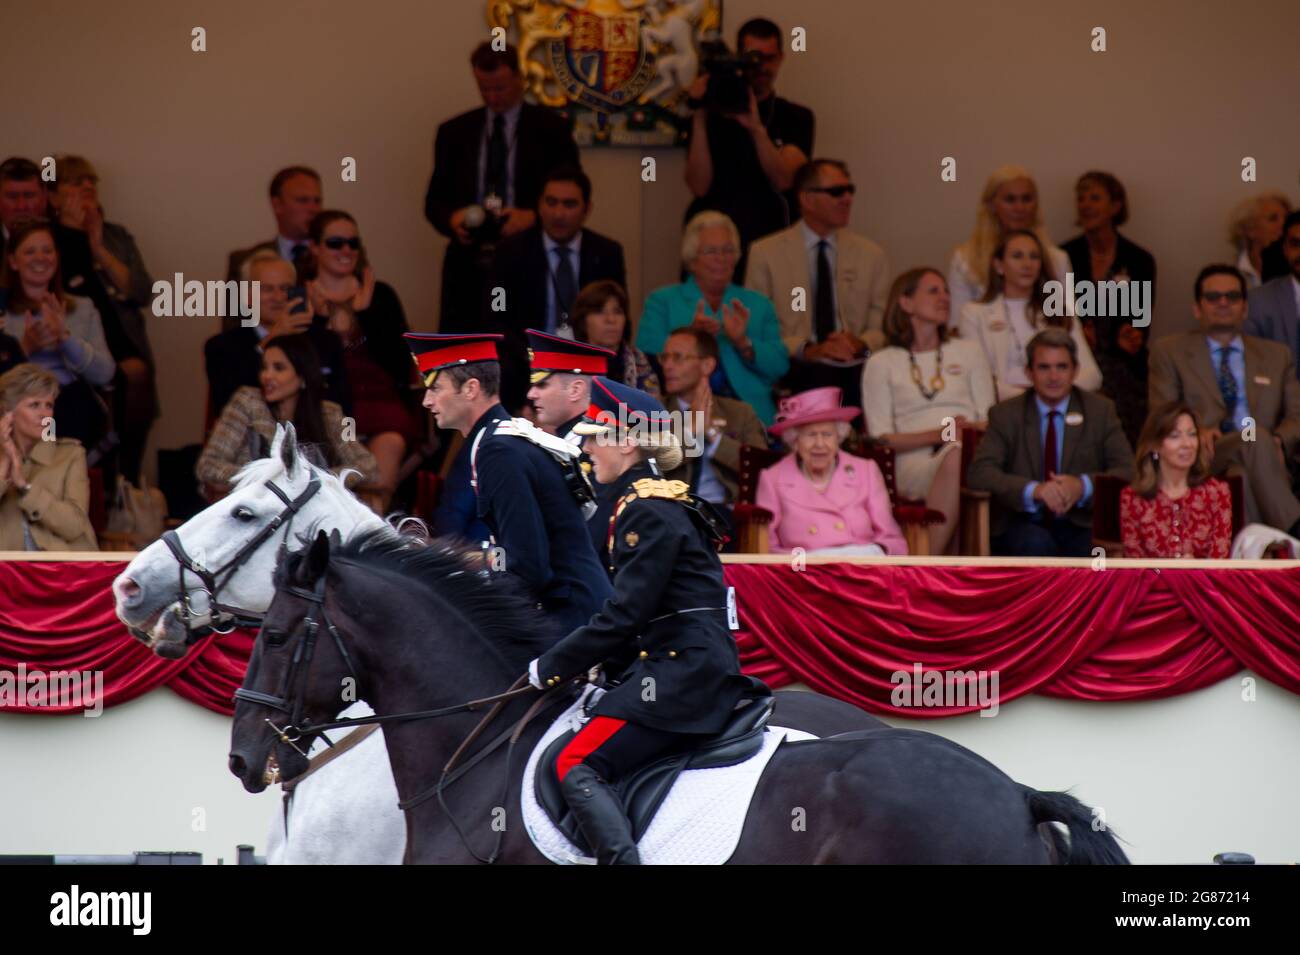 Windsor, Berkshire, UK. 3rd July, 2021. Queen Elizabeth II wore a pale pink coat and hat this afternoon in the Royal Box at Royal Windsor Horse Show as she watched the Land Rover Services Team Jumping Parade. Credit: Maureen McLean/Alamy Stock Photo